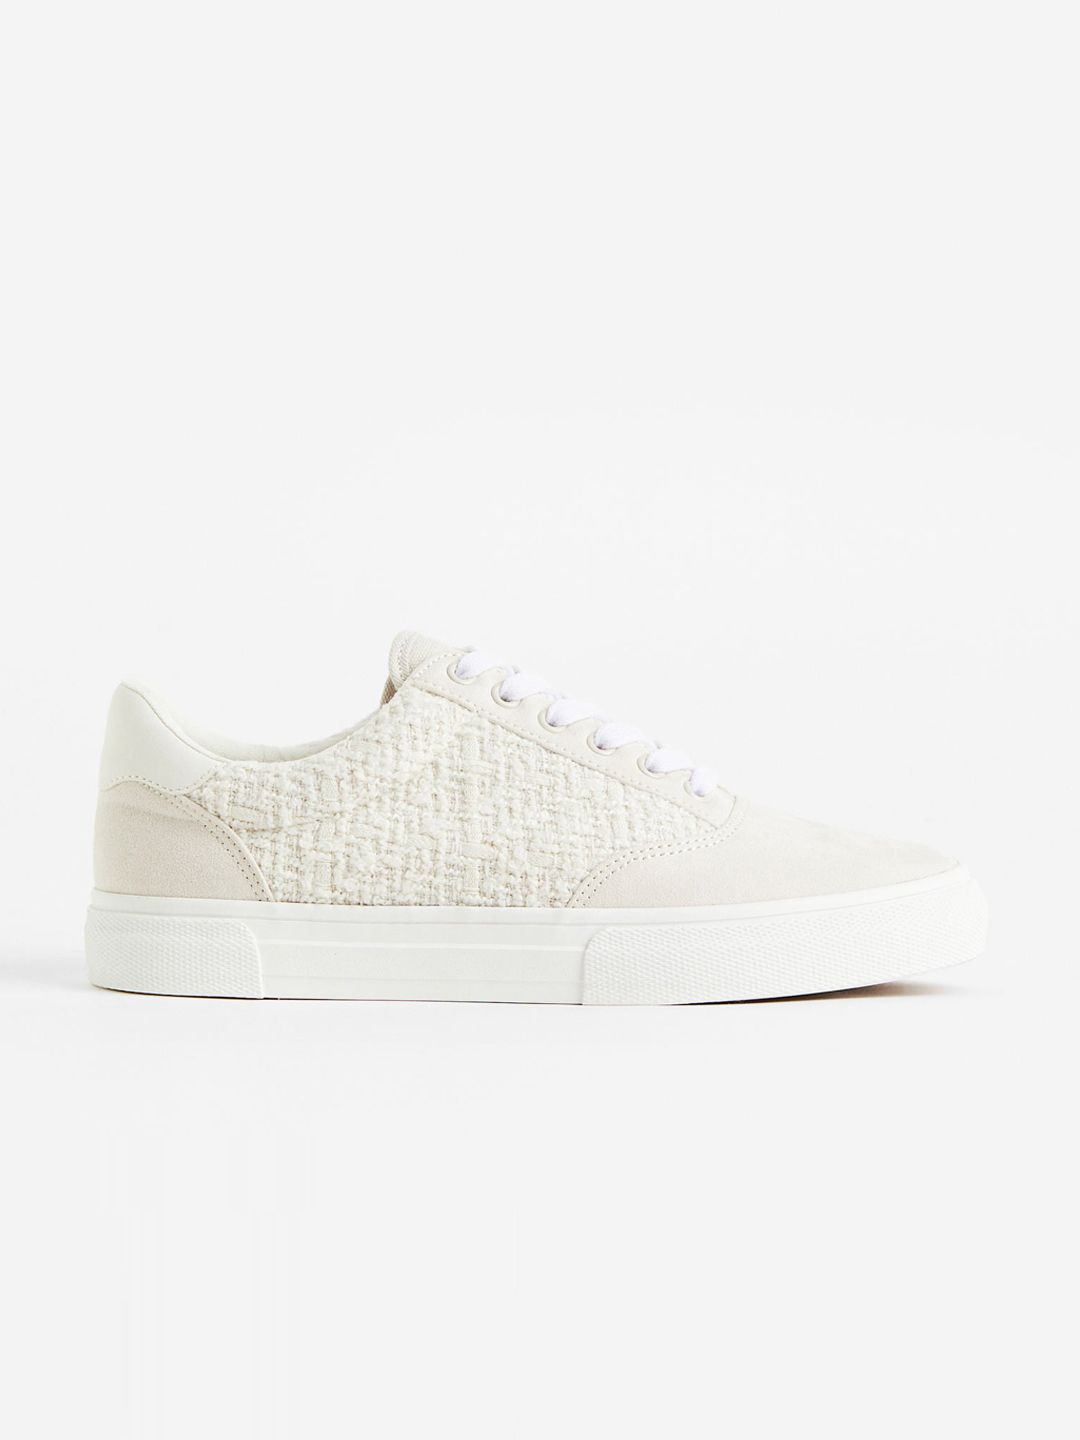 H&M Textured Trainers Price in India